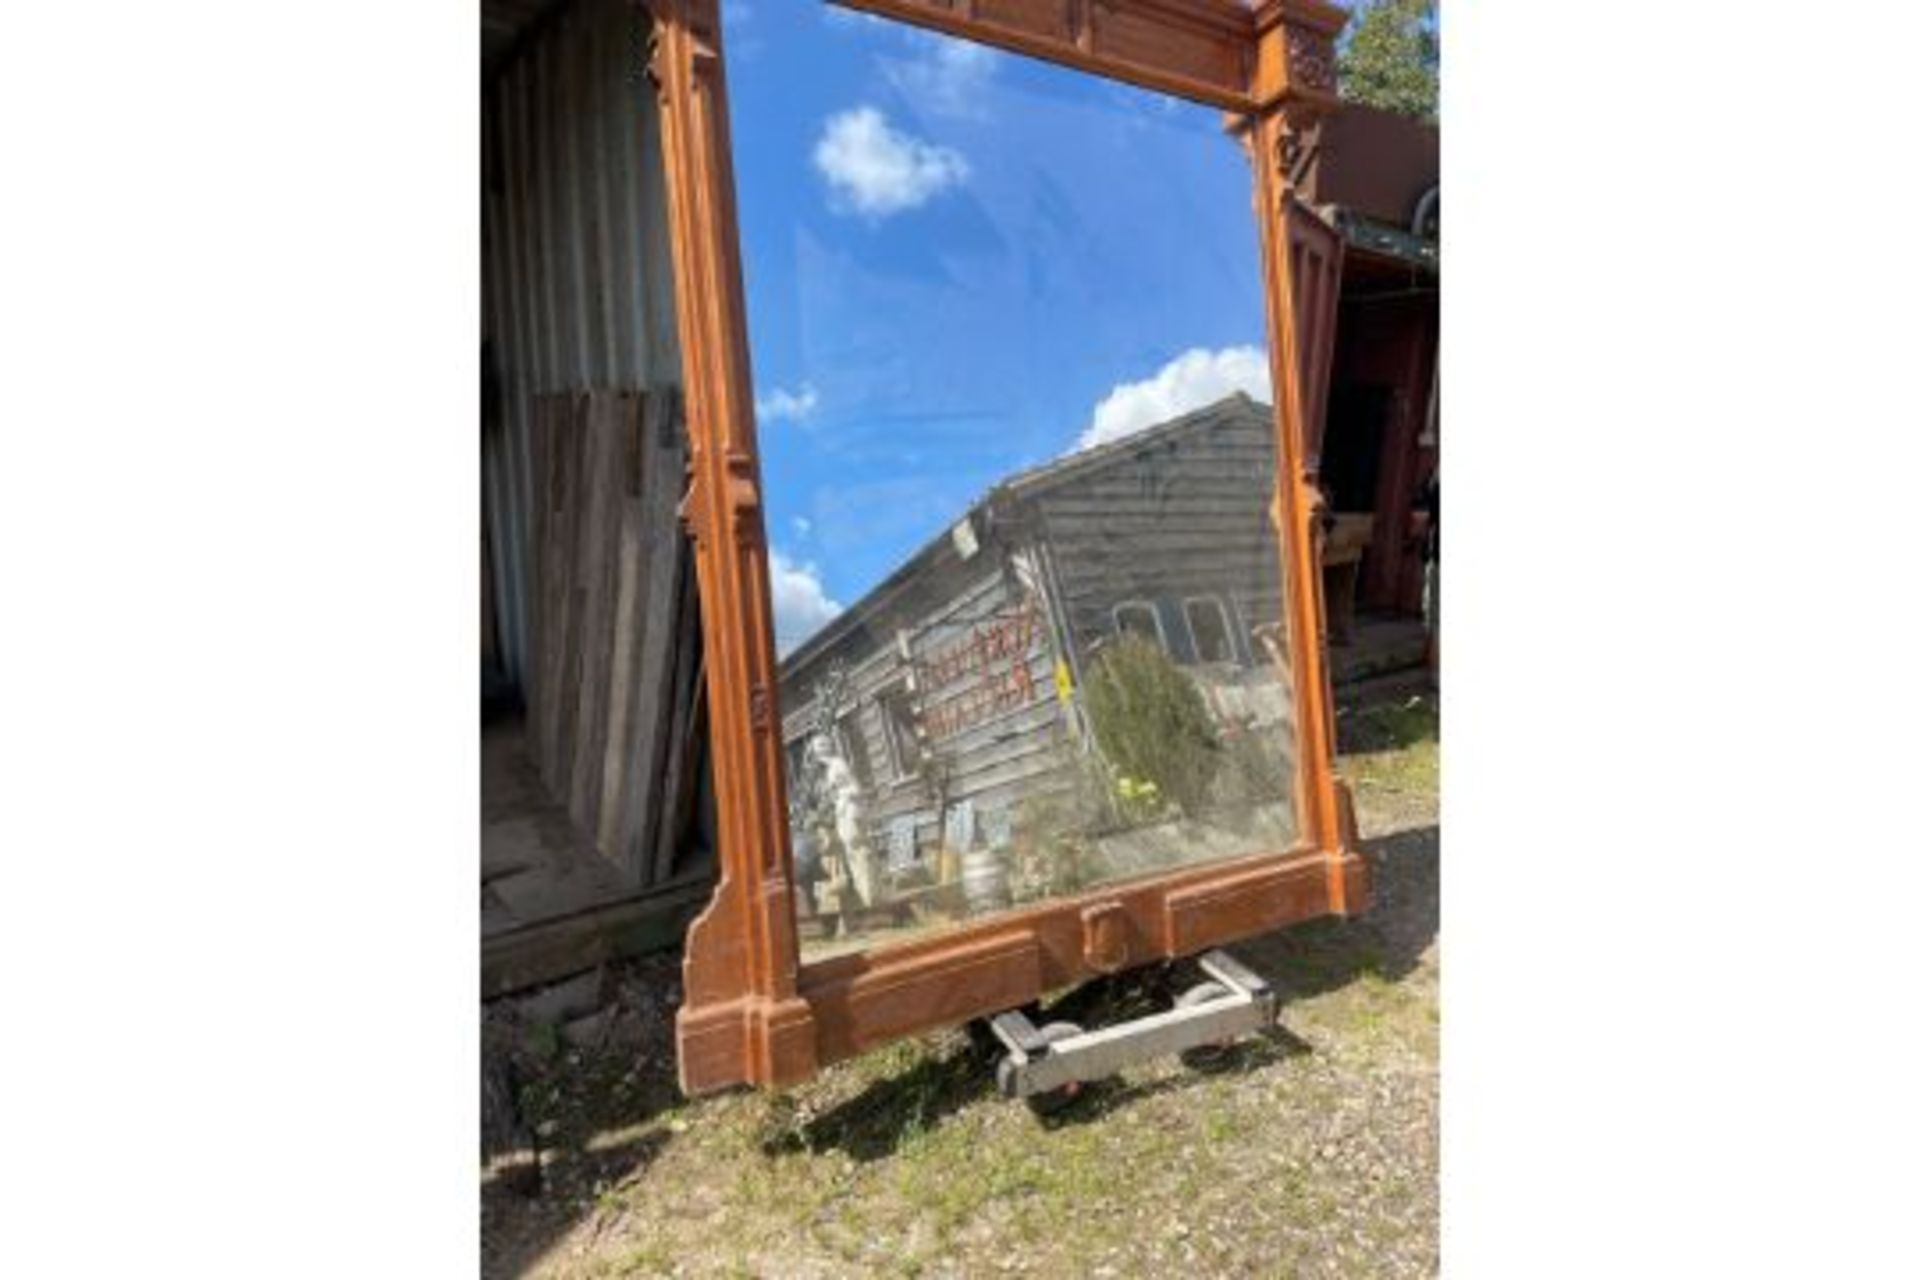 Mirror 9 foot by 6ft gothic style mirror 20th century